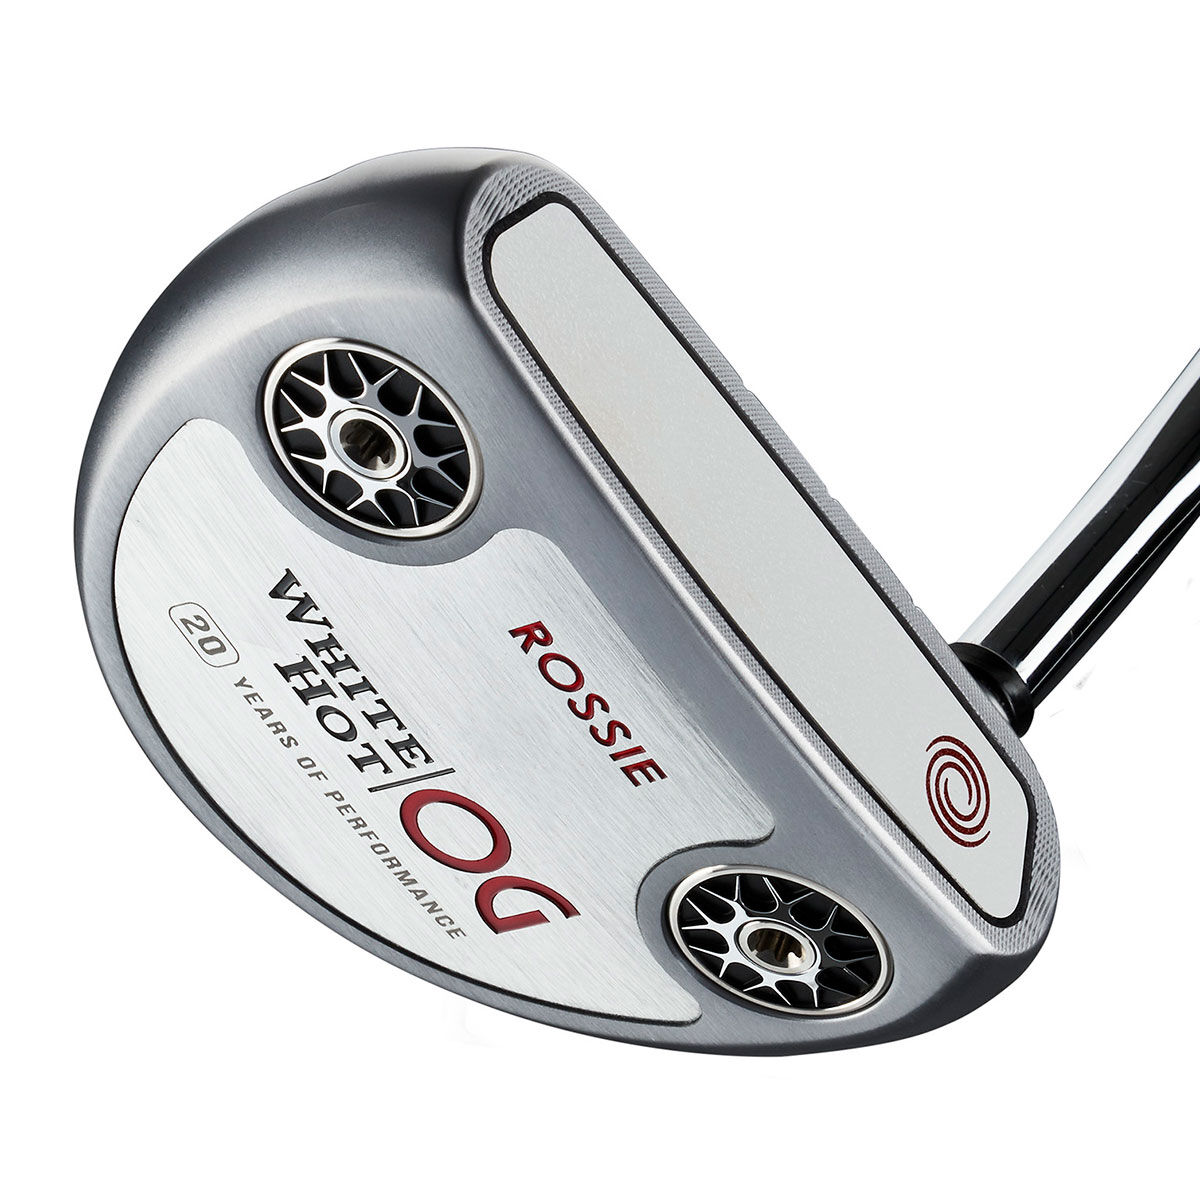 Golf Putter Odyssey White Hot OG Rossie OS, homme, Main Droite, 34 pouces | Online Golf